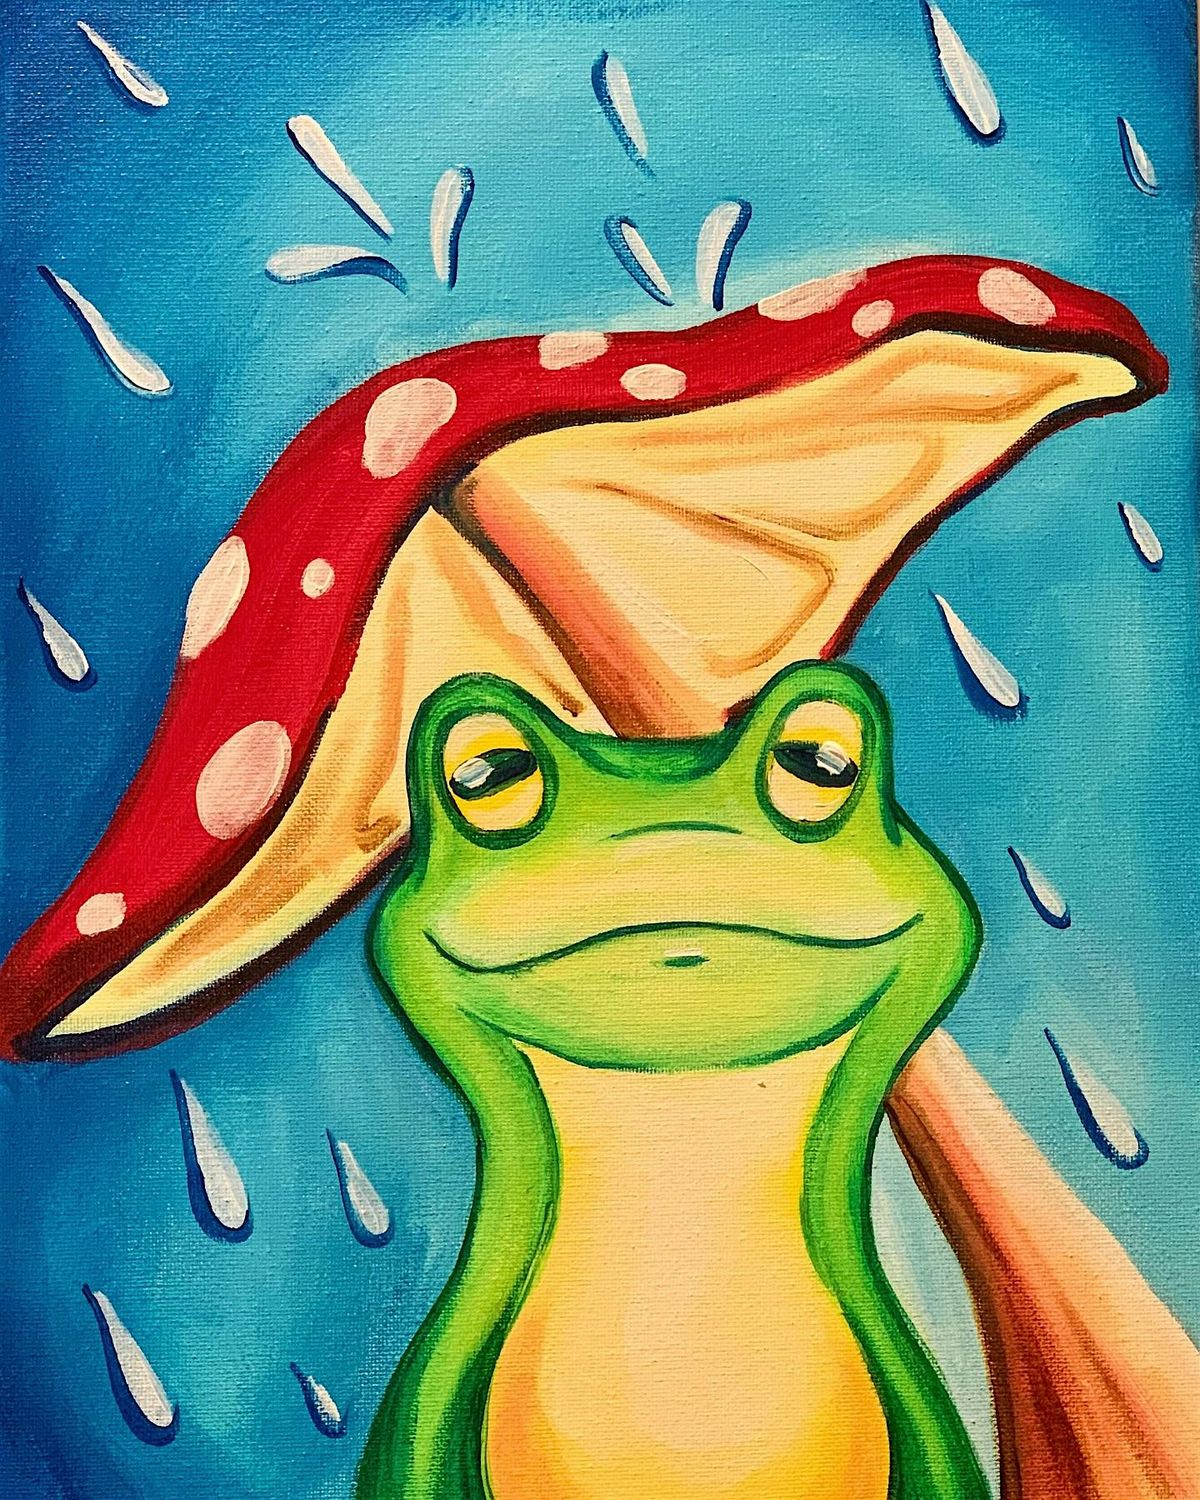 SPRING SIP AND PAINT "FEELIN' FROGGY" WITH MJ KING